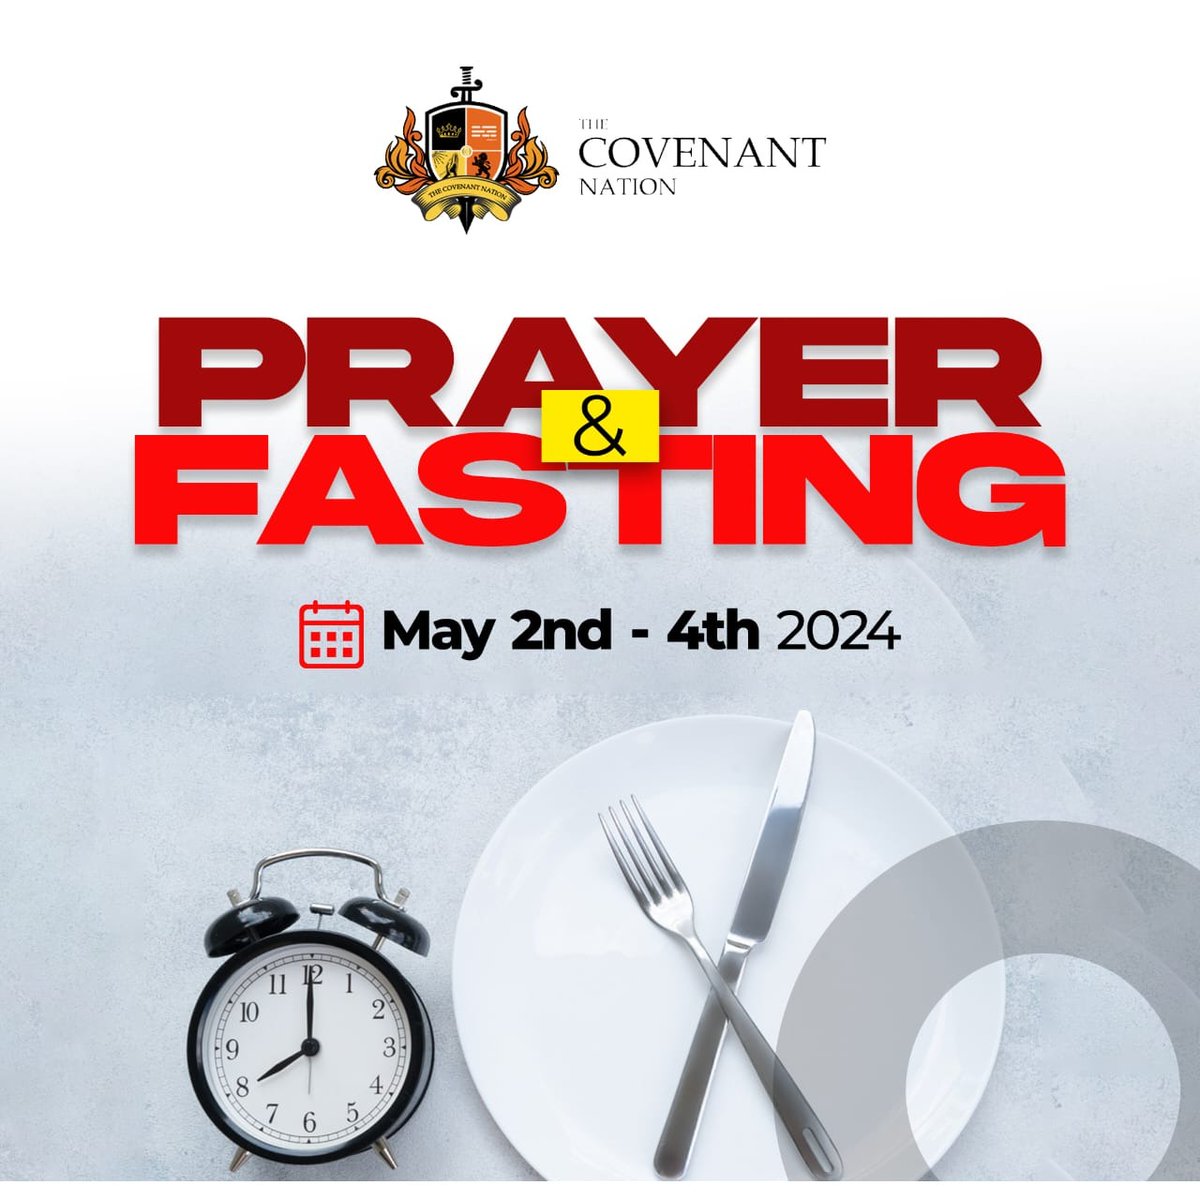 'And therefore will the Lord wait, that he may be gracious unto you, and therefore will he be exalted, that he may have mercy upon you: for the Lord is a God of judgement: blessed are all they that wait for him.' 

Our new month Prayer and Fasting has begun. 

#tcnbadagry